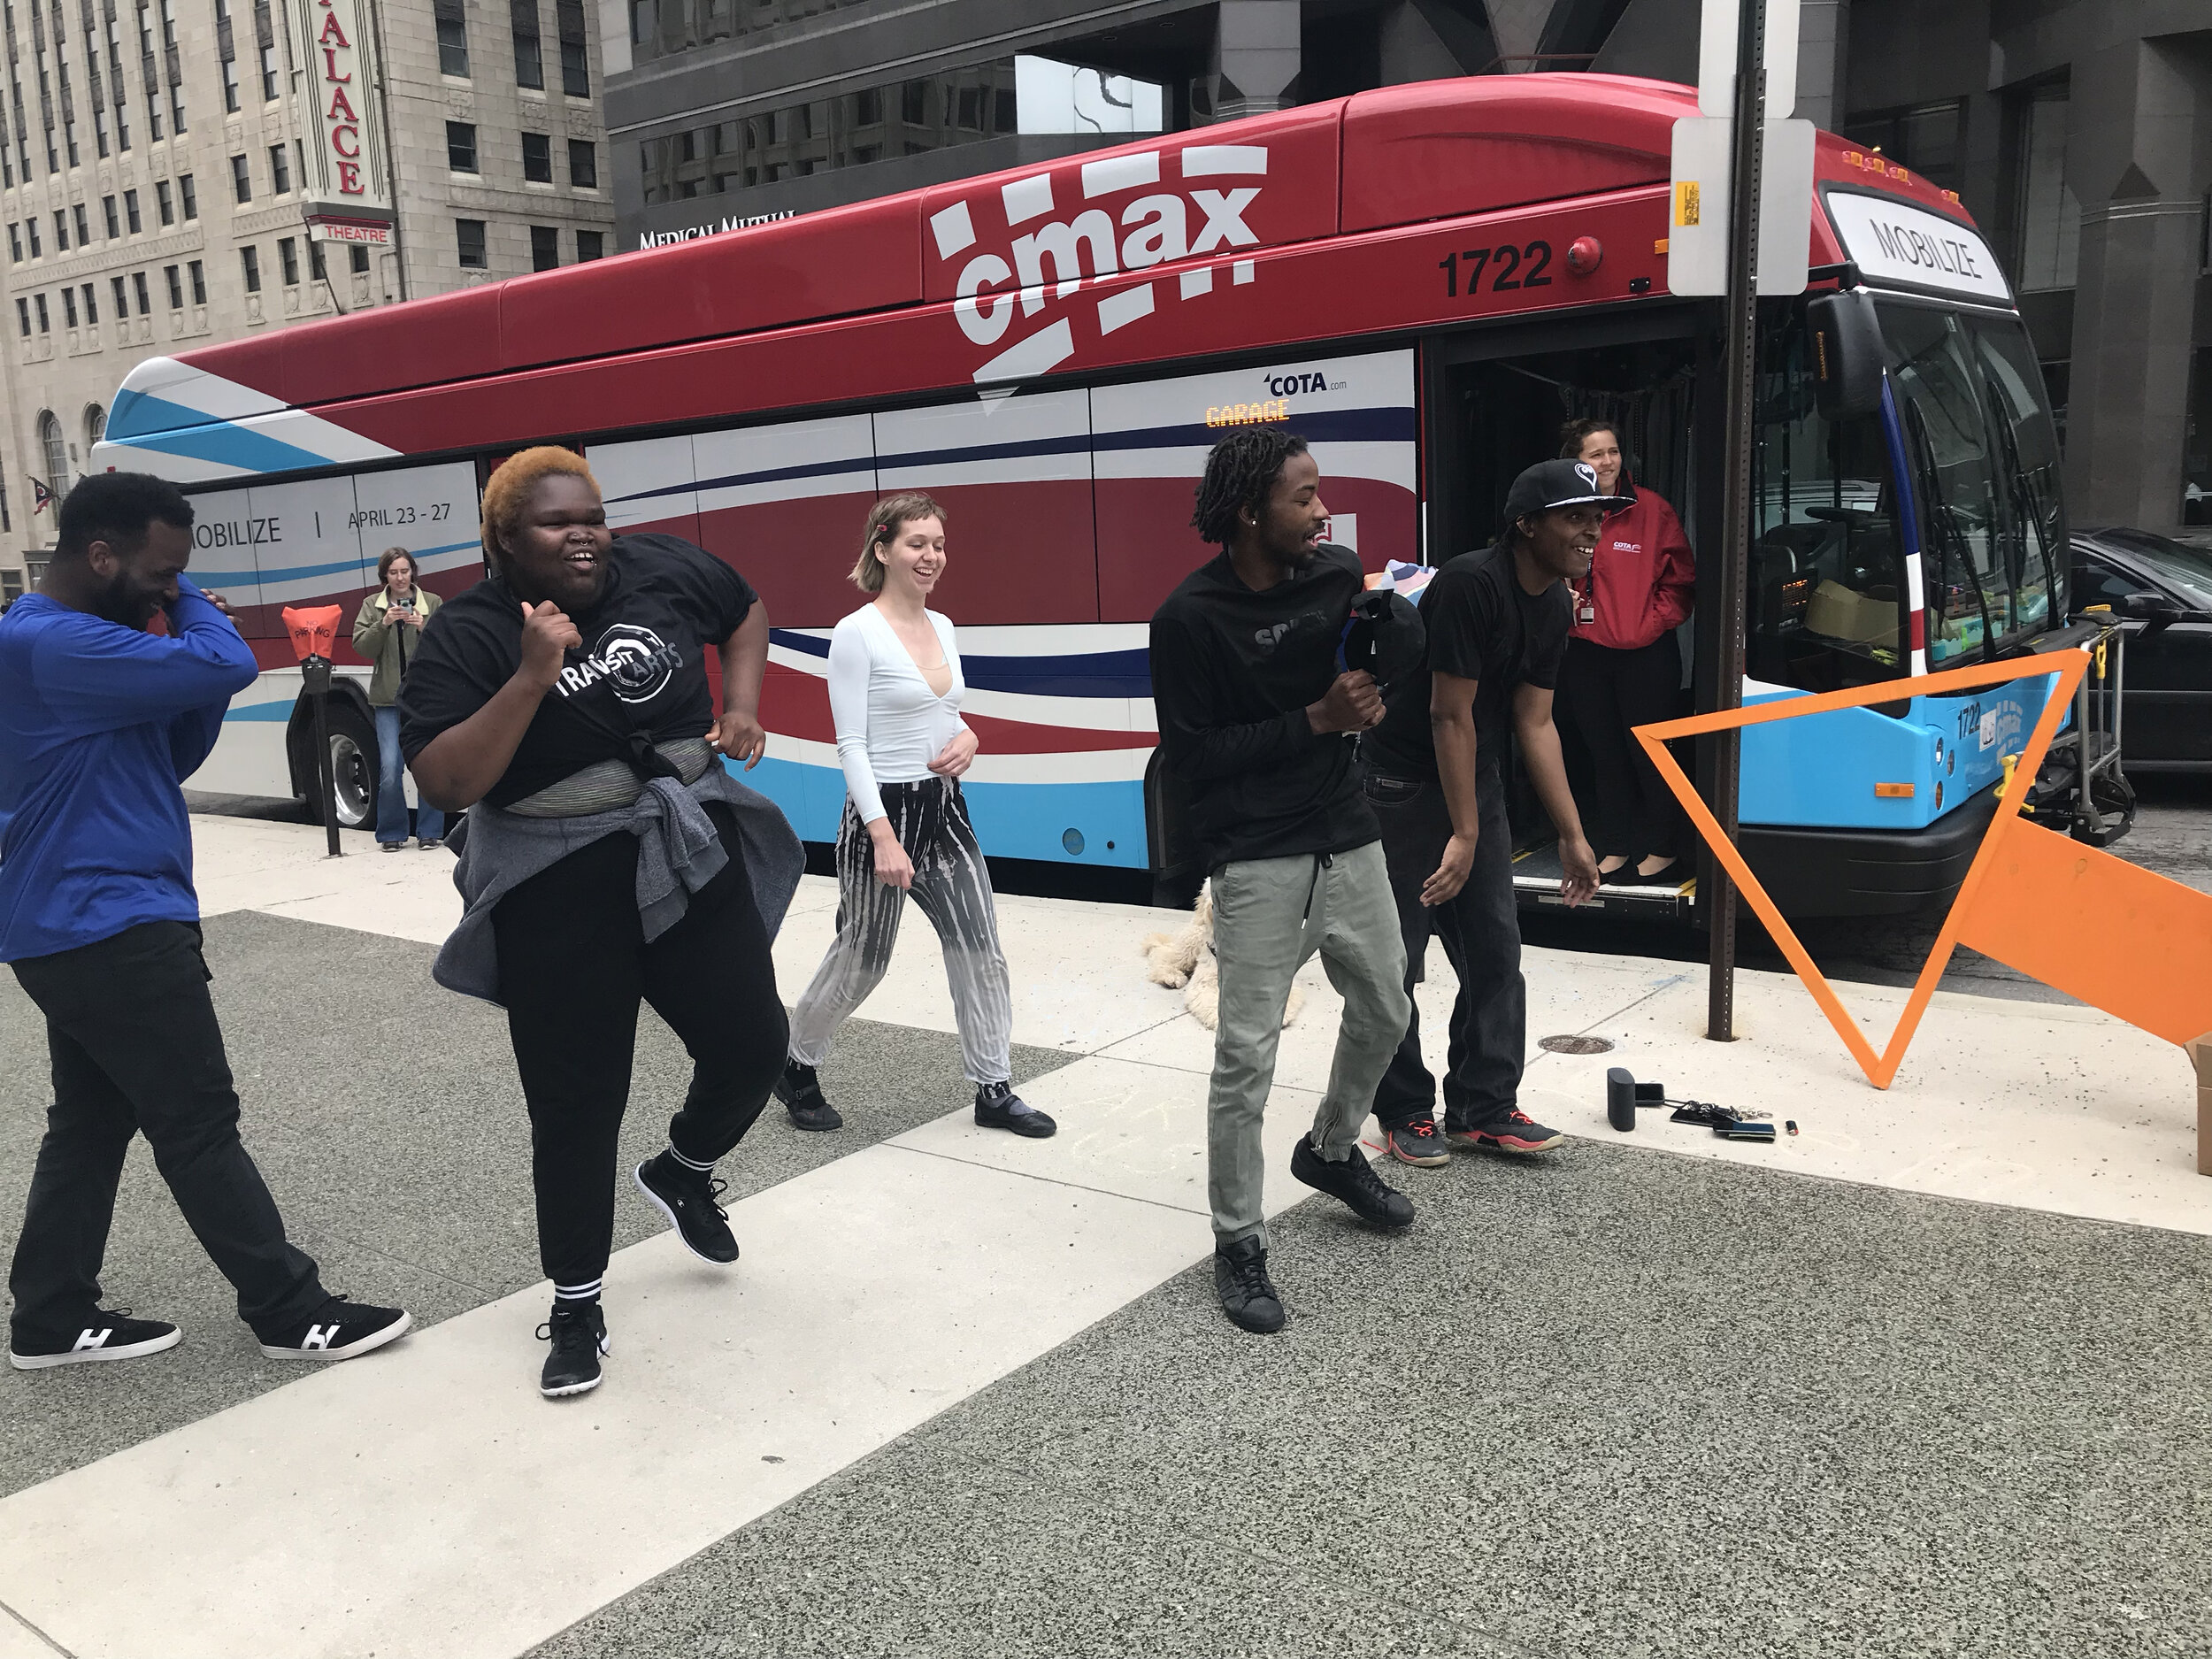  Wednesday, April 25, ​Mobilize - Health and Transportation: Dancing with Katy Daiber and TRANSIT ARTS including: Rese, Spain, Skater Drew, Katerina, and Spector 